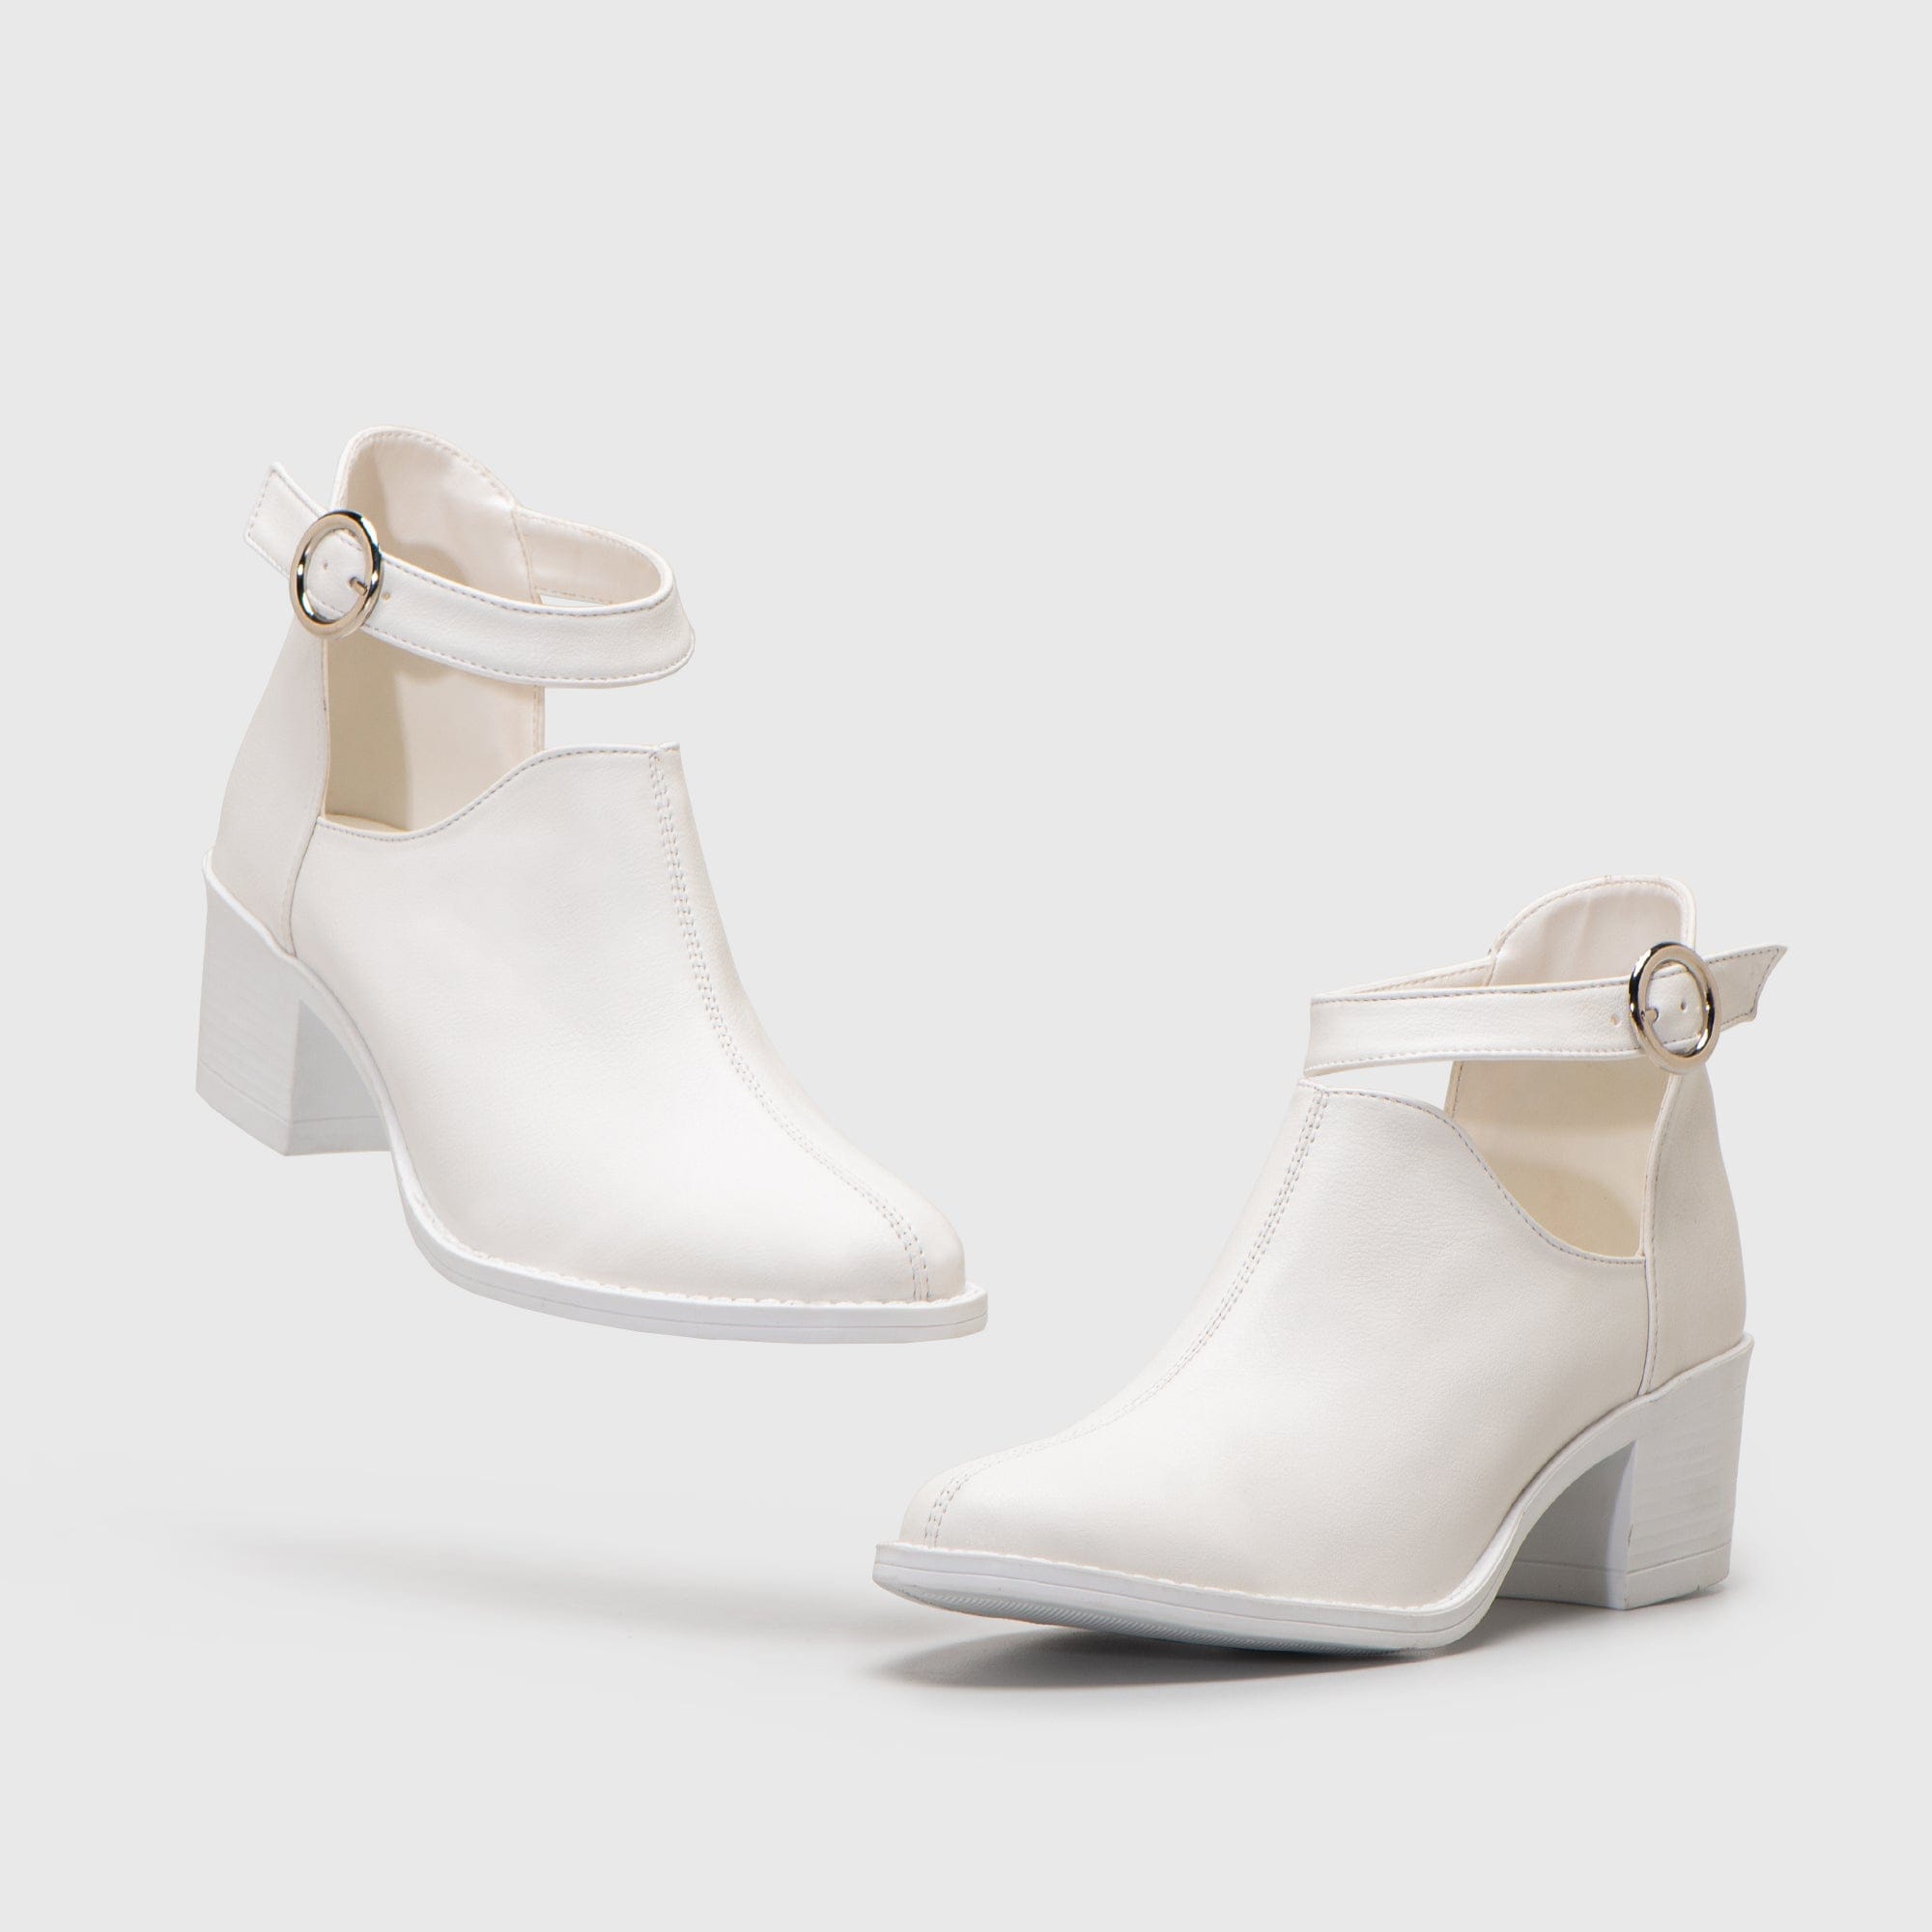 Adorable Projects Official Boots Lodka Boots White Heels